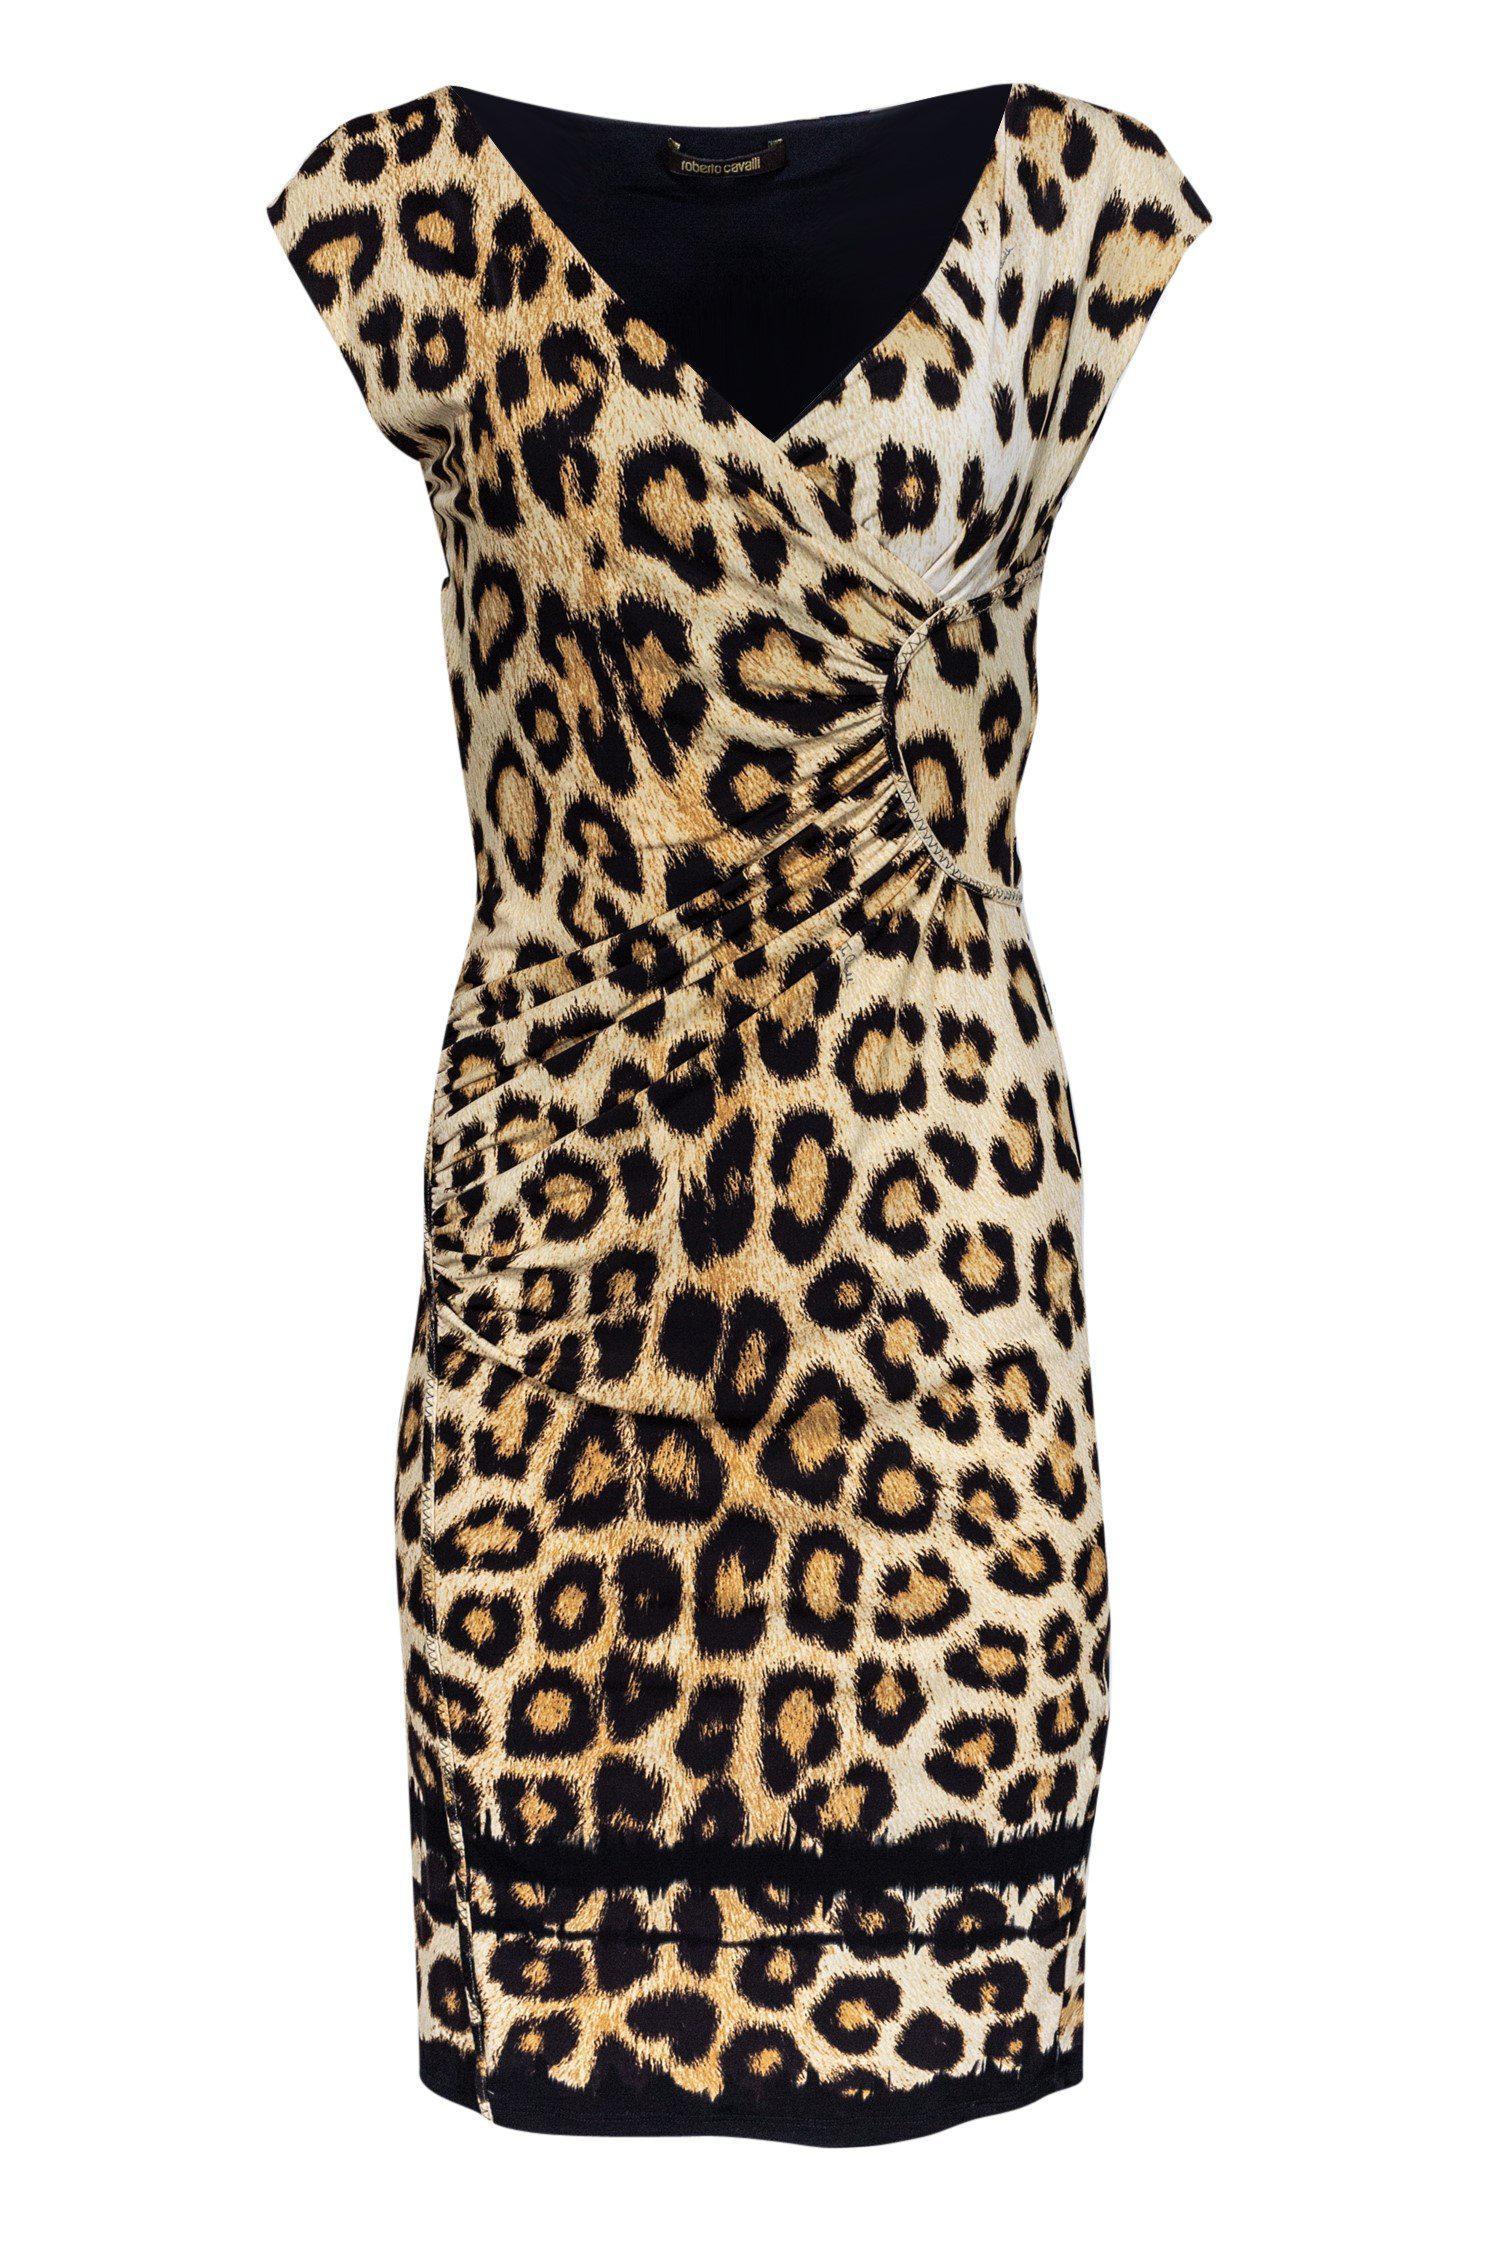 Roberto Cavalli Leather Leopard Print Fitted Dress - Lyst